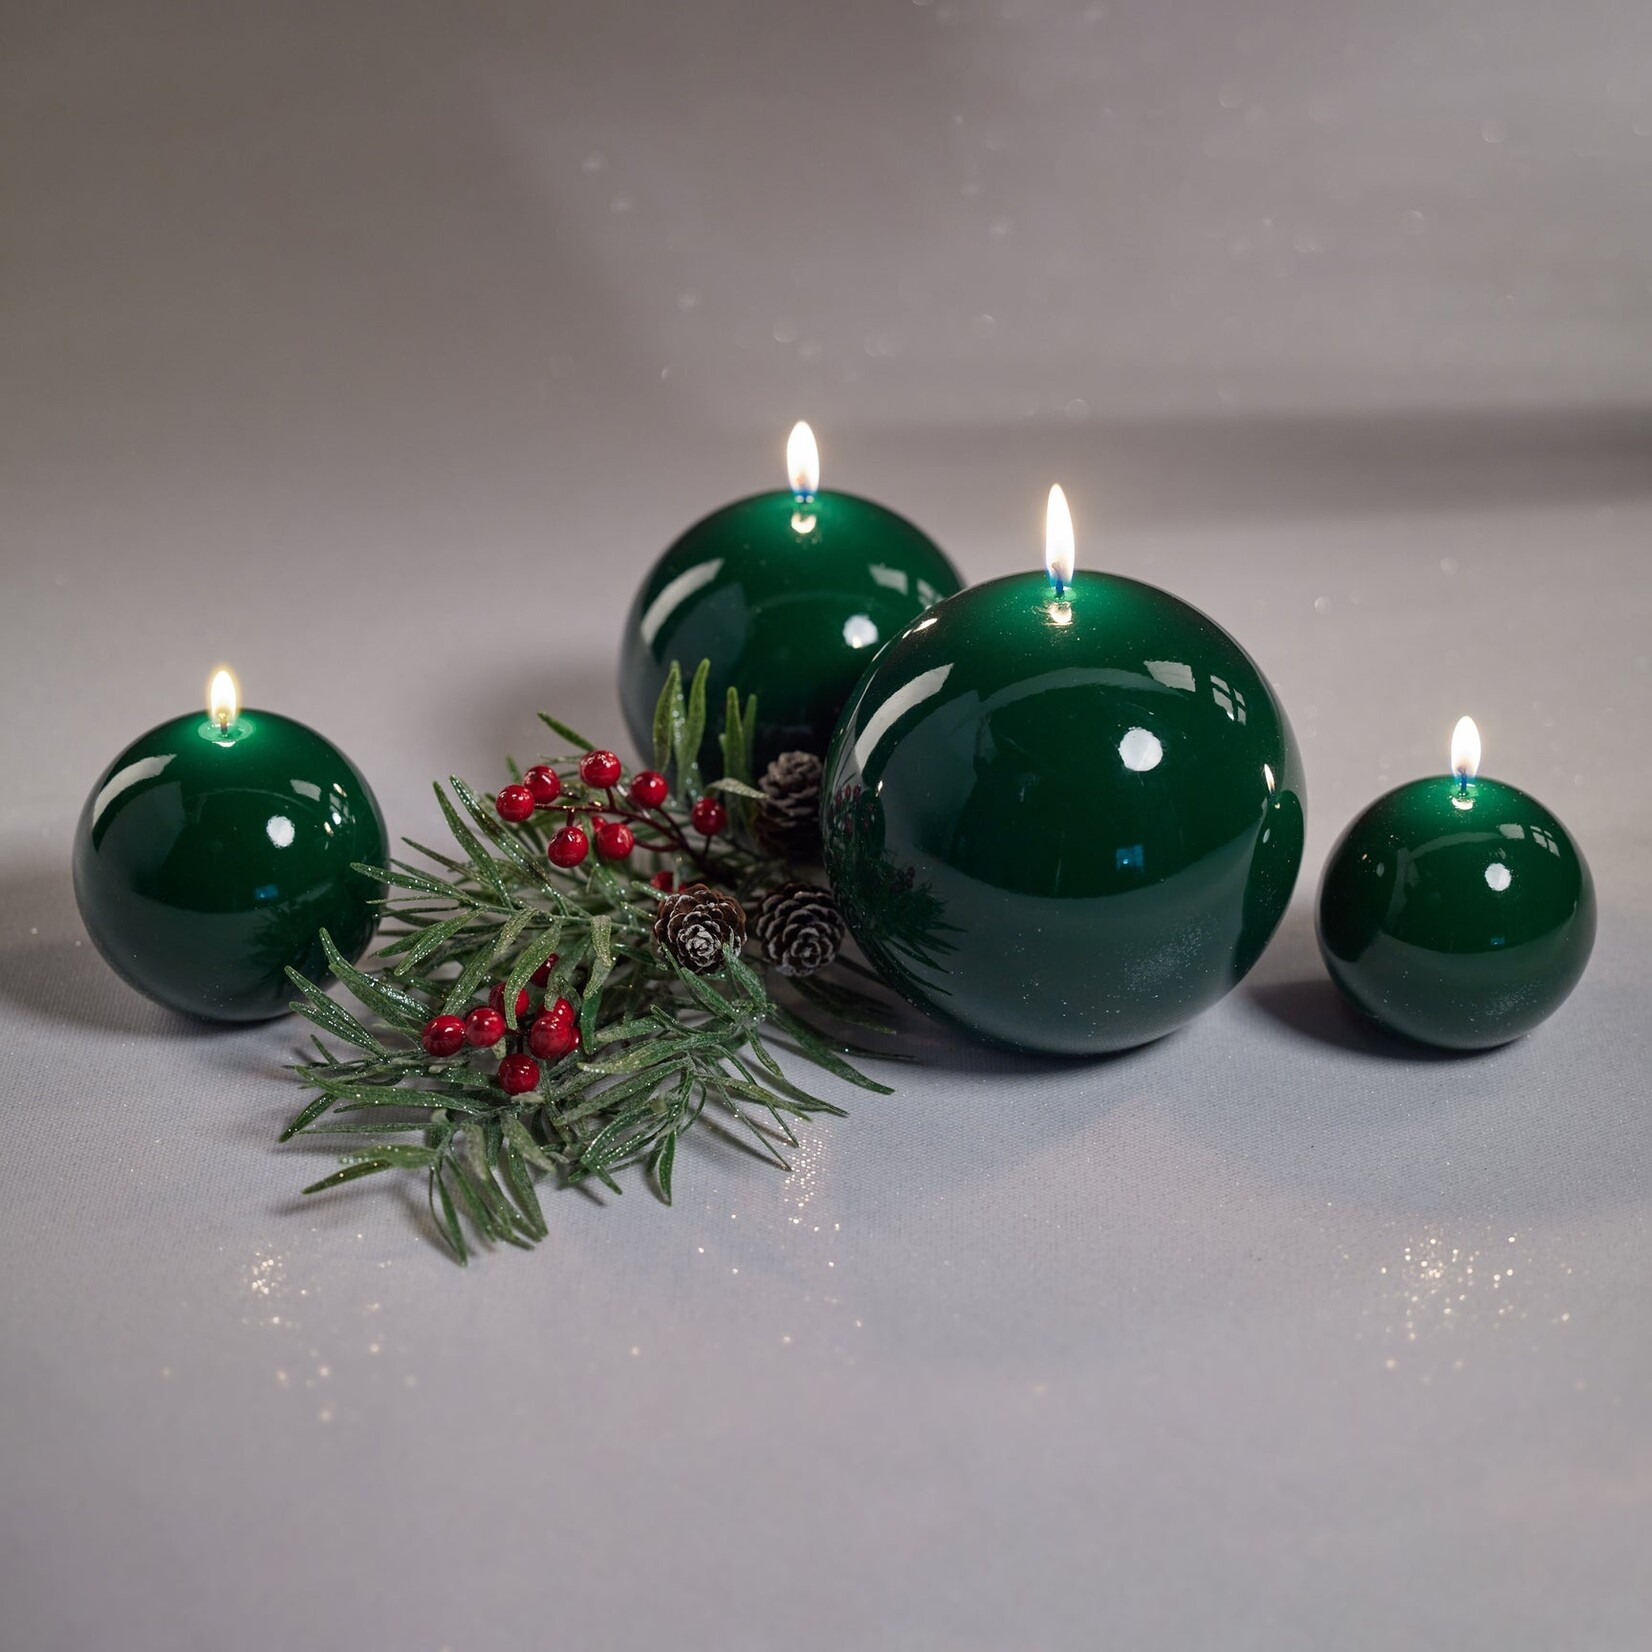 Zodax Lacquer Ball Candles